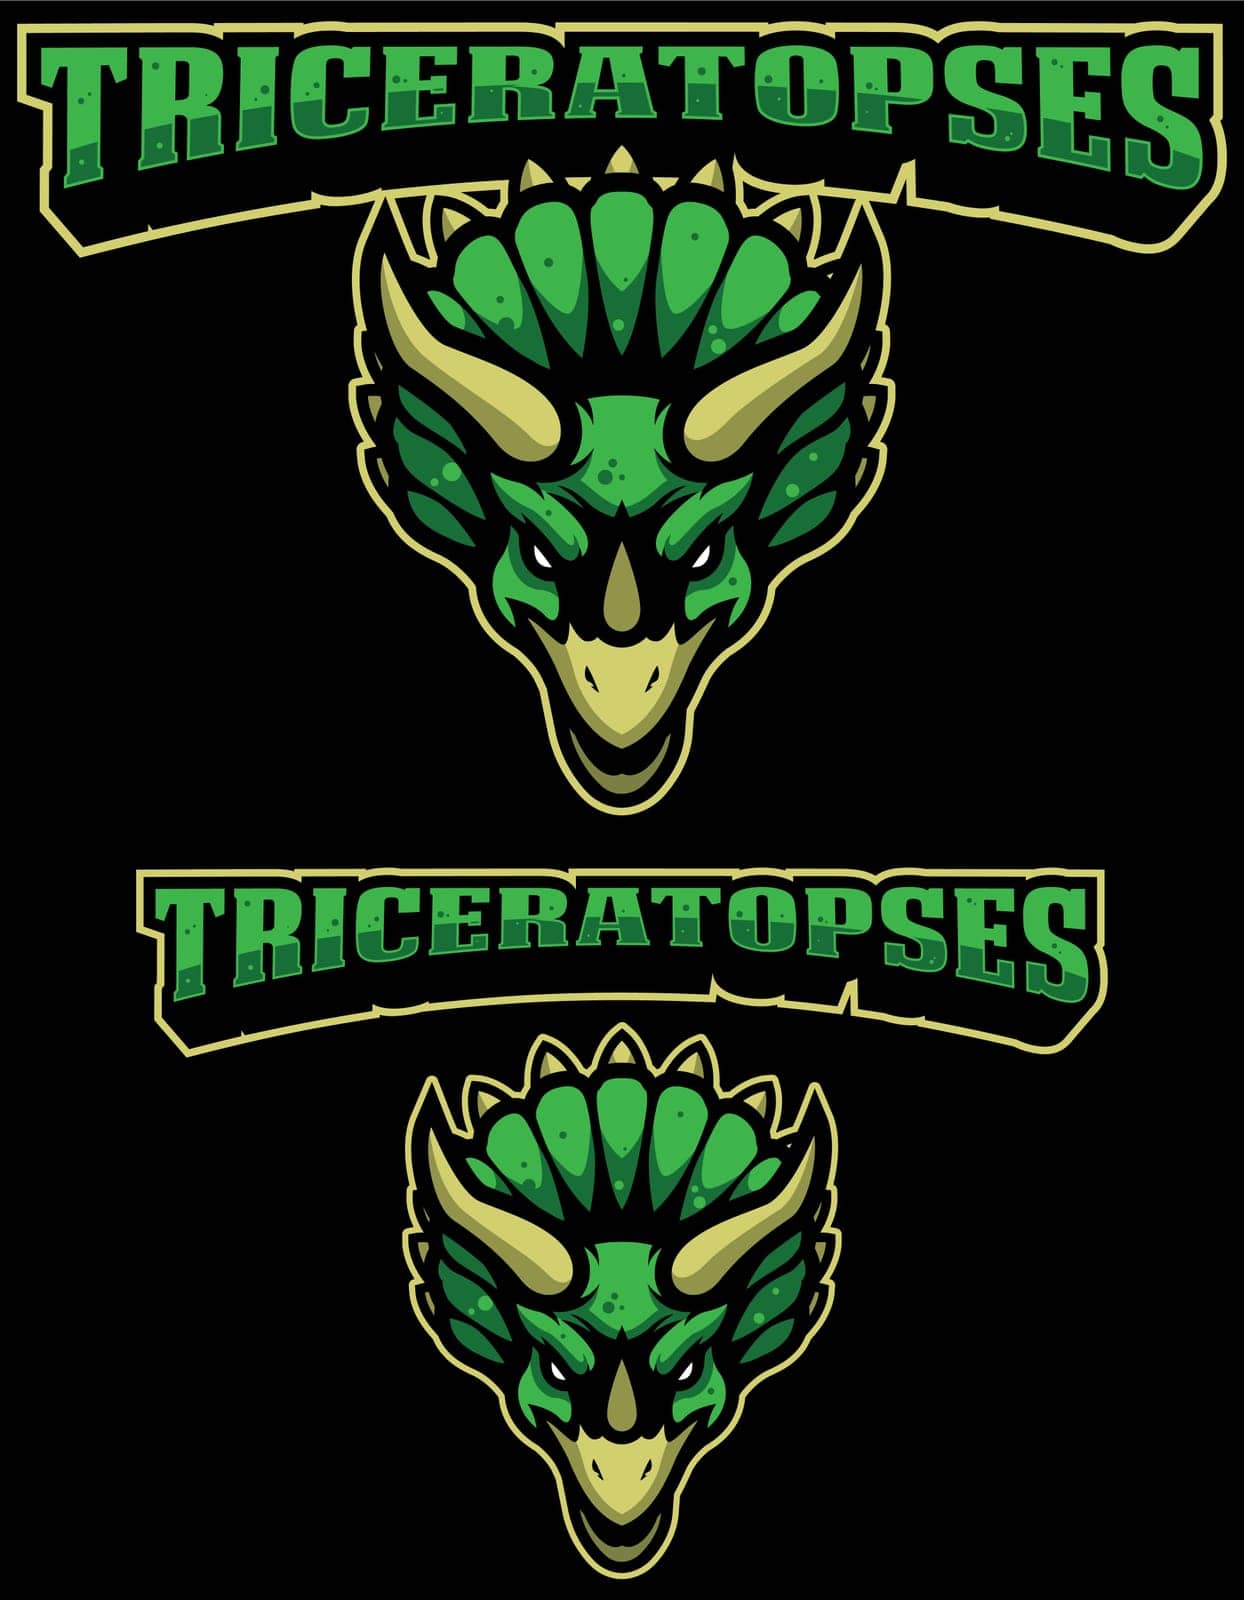 Triceratopses Mascot by Malchev